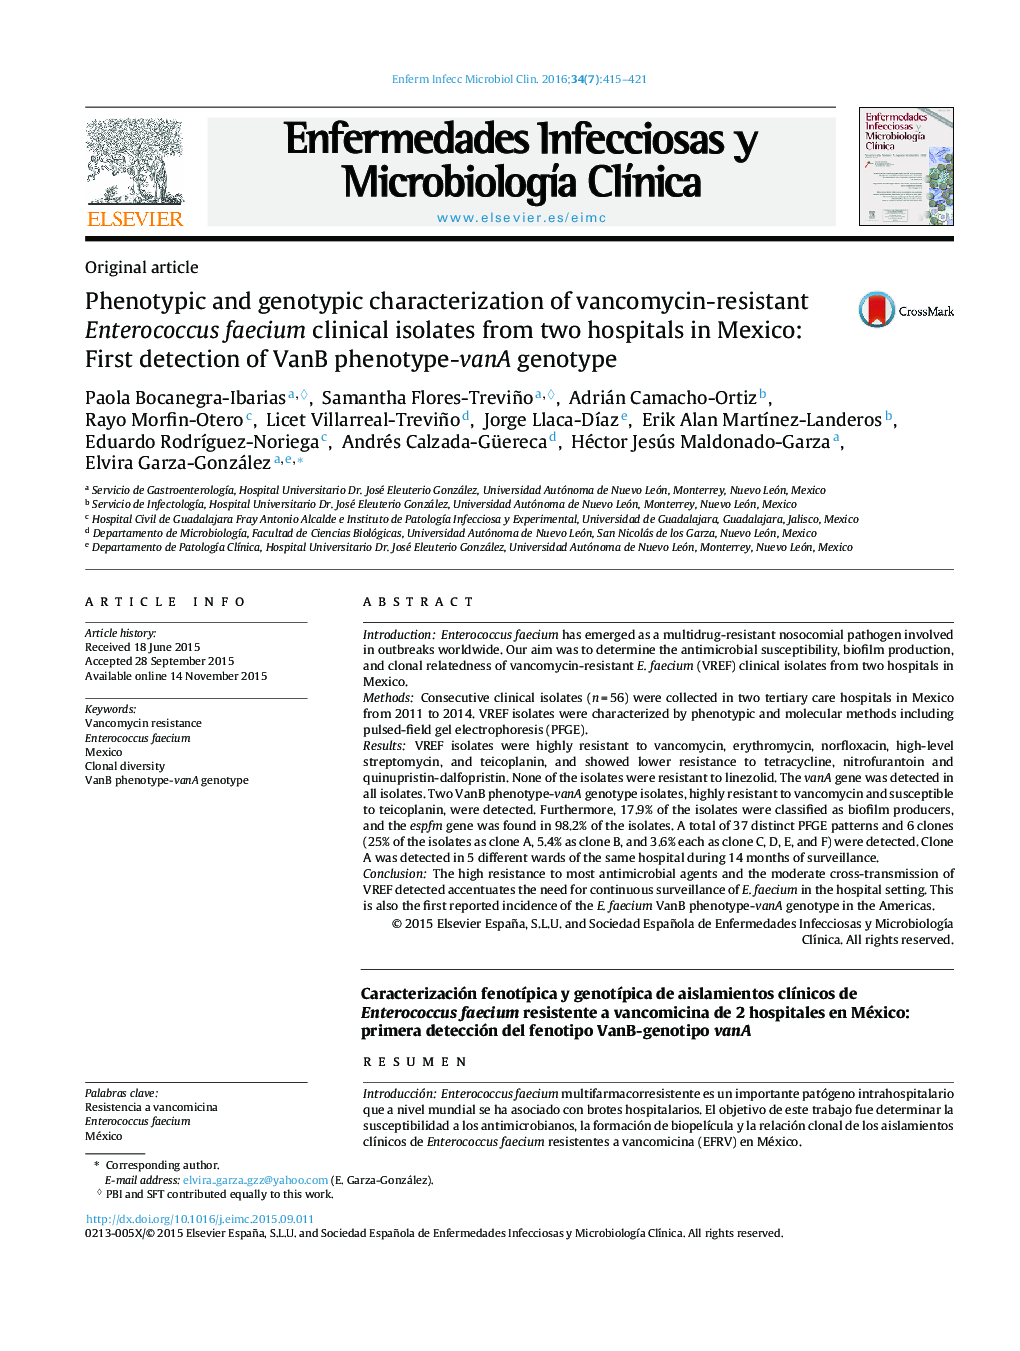 Phenotypic and genotypic characterization of vancomycin-resistant Enterococcus faecium clinical isolates from two hospitals in Mexico: First detection of VanB phenotype-vanA genotype